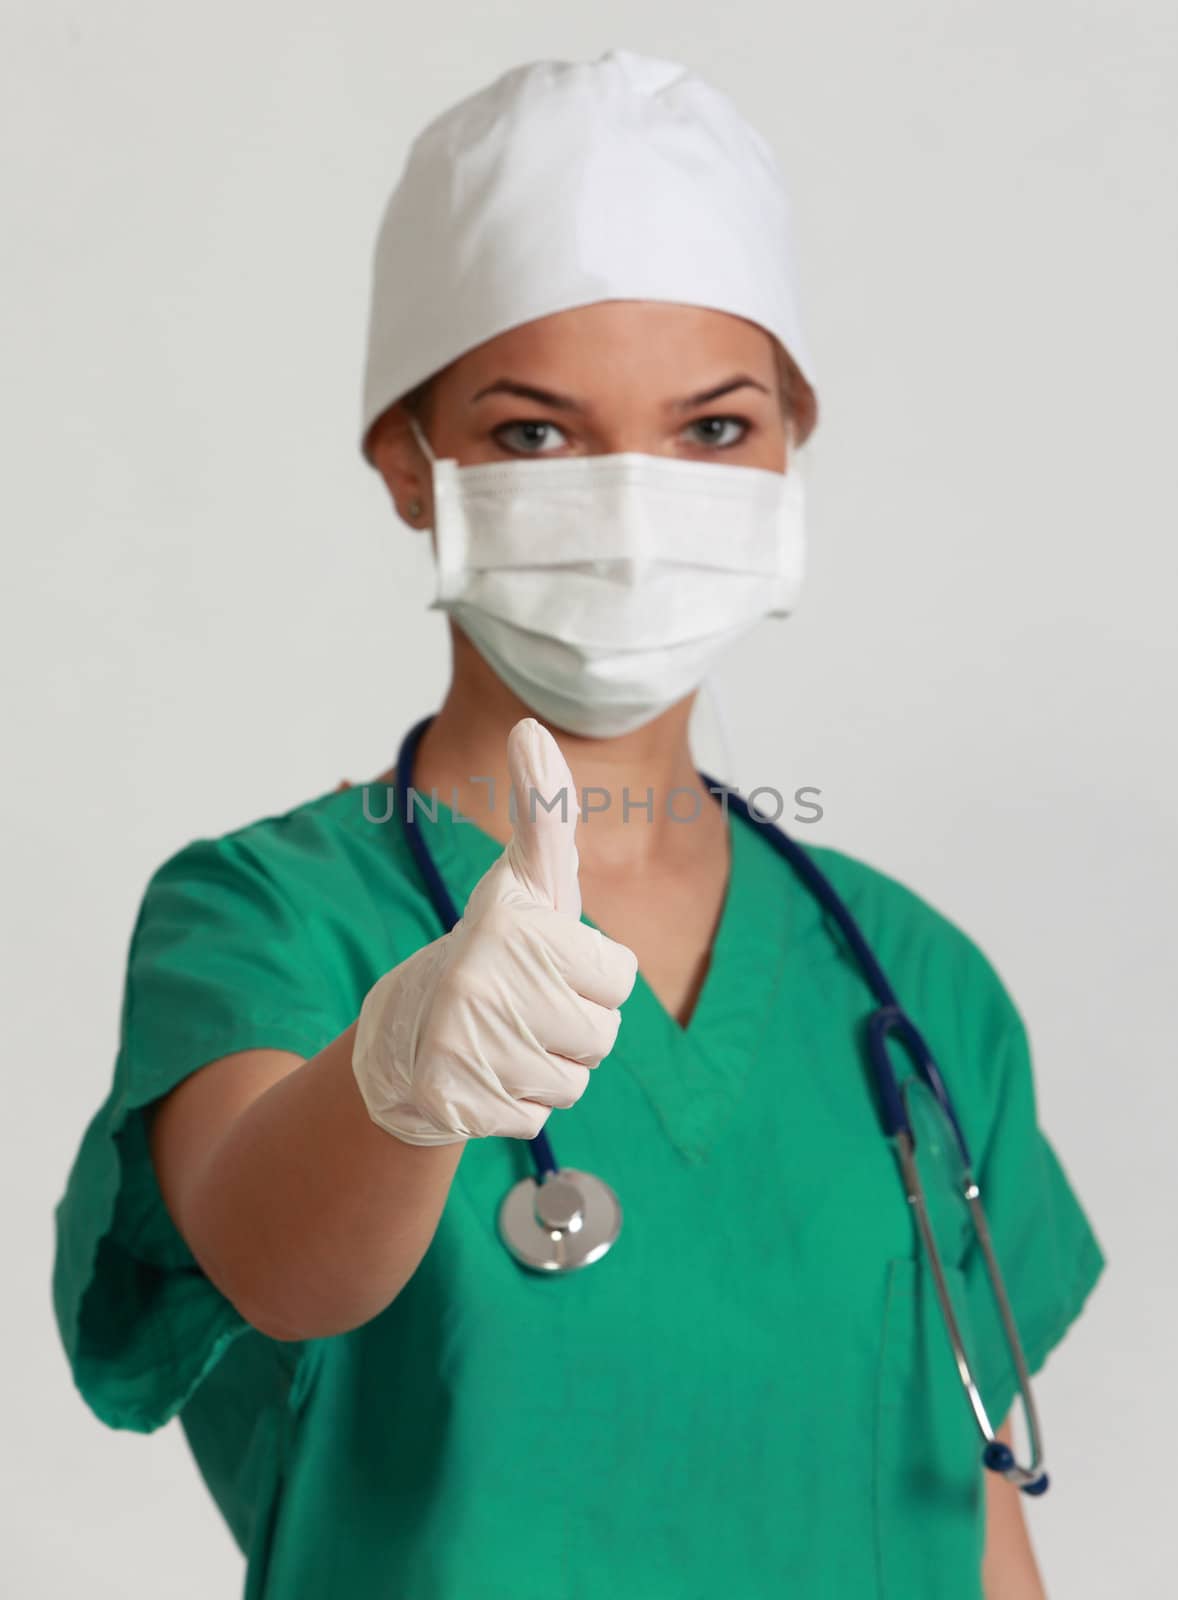 Portrait of a young woman doctor with her right thumb up, isolated against a white background.Selective focus on the thumb.